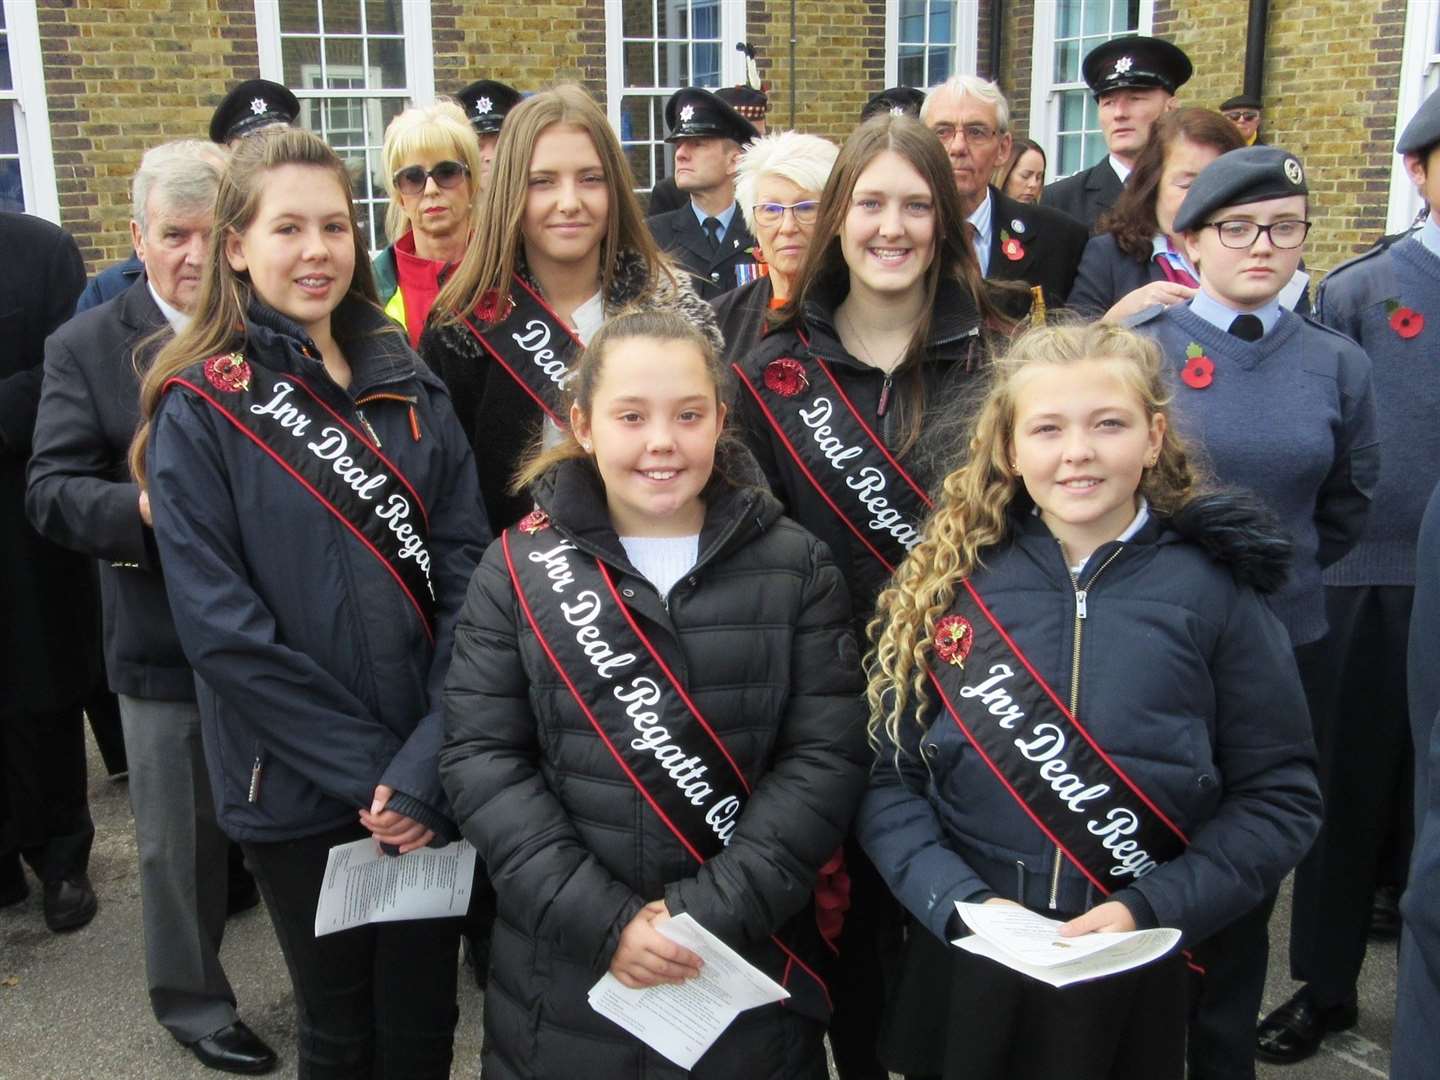 Selection of new queen and princesses for Deal Carnival Court 2020